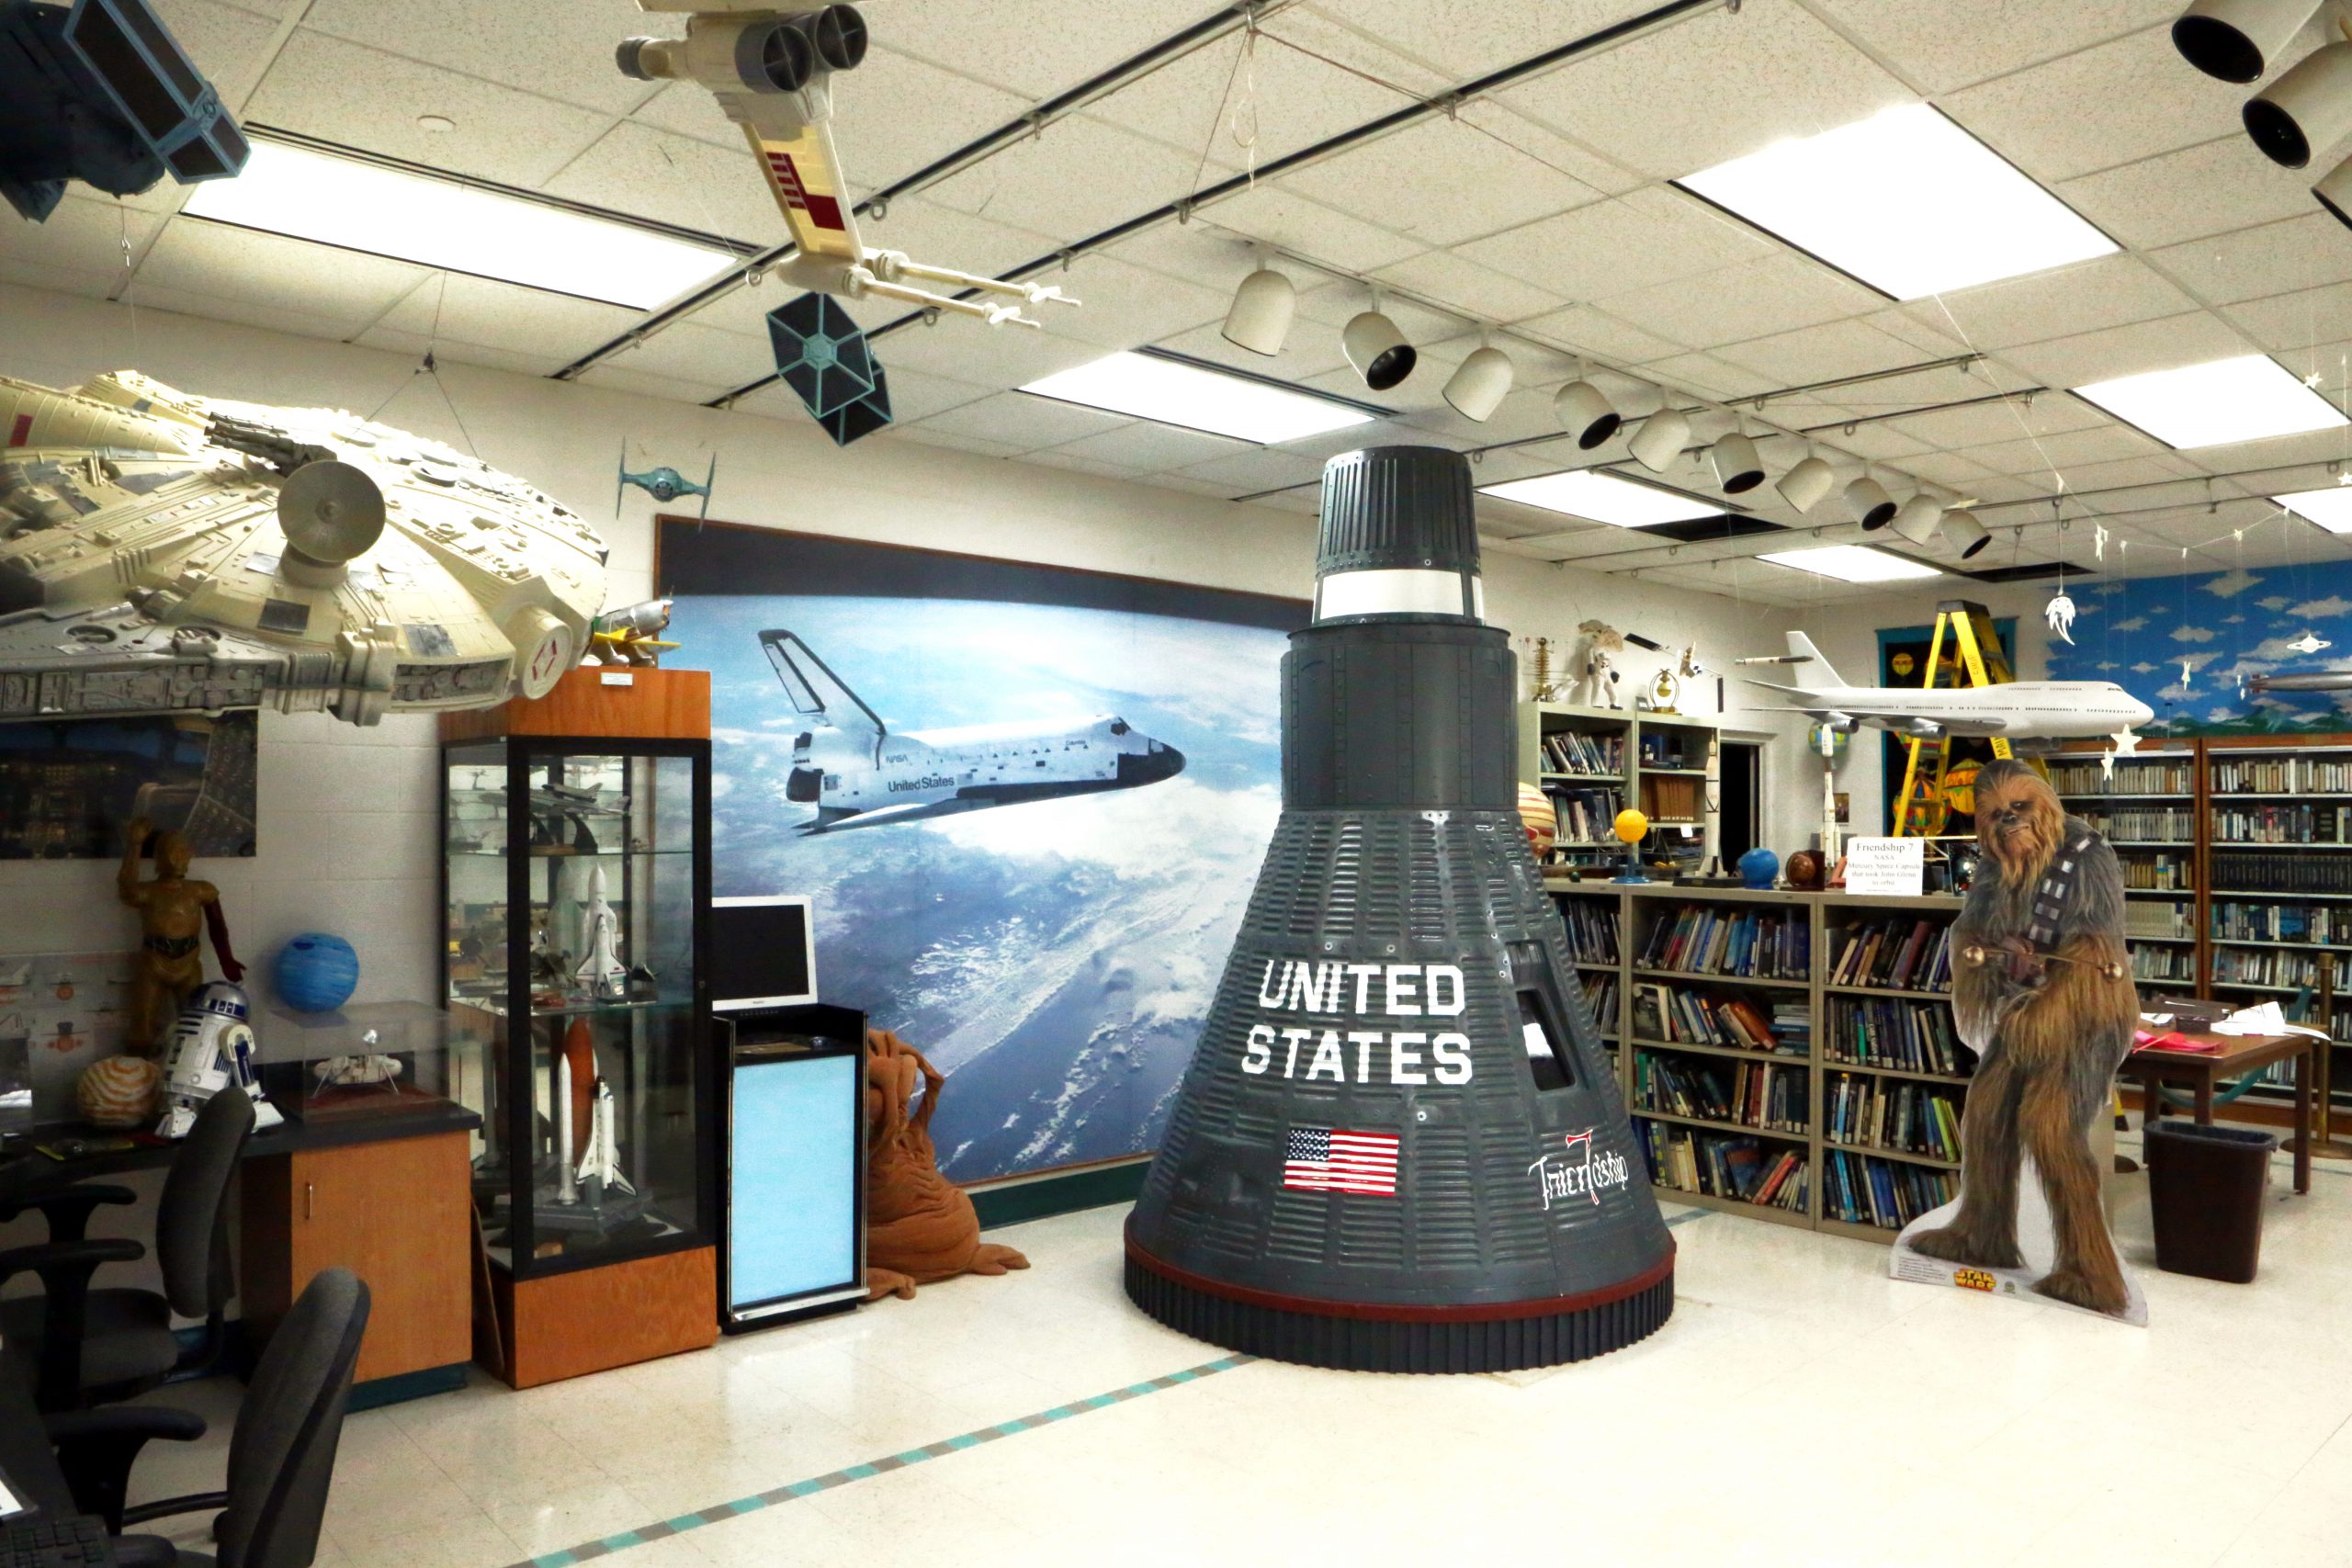 Aerospace Exploration lab with model planes, books, and other fun activities